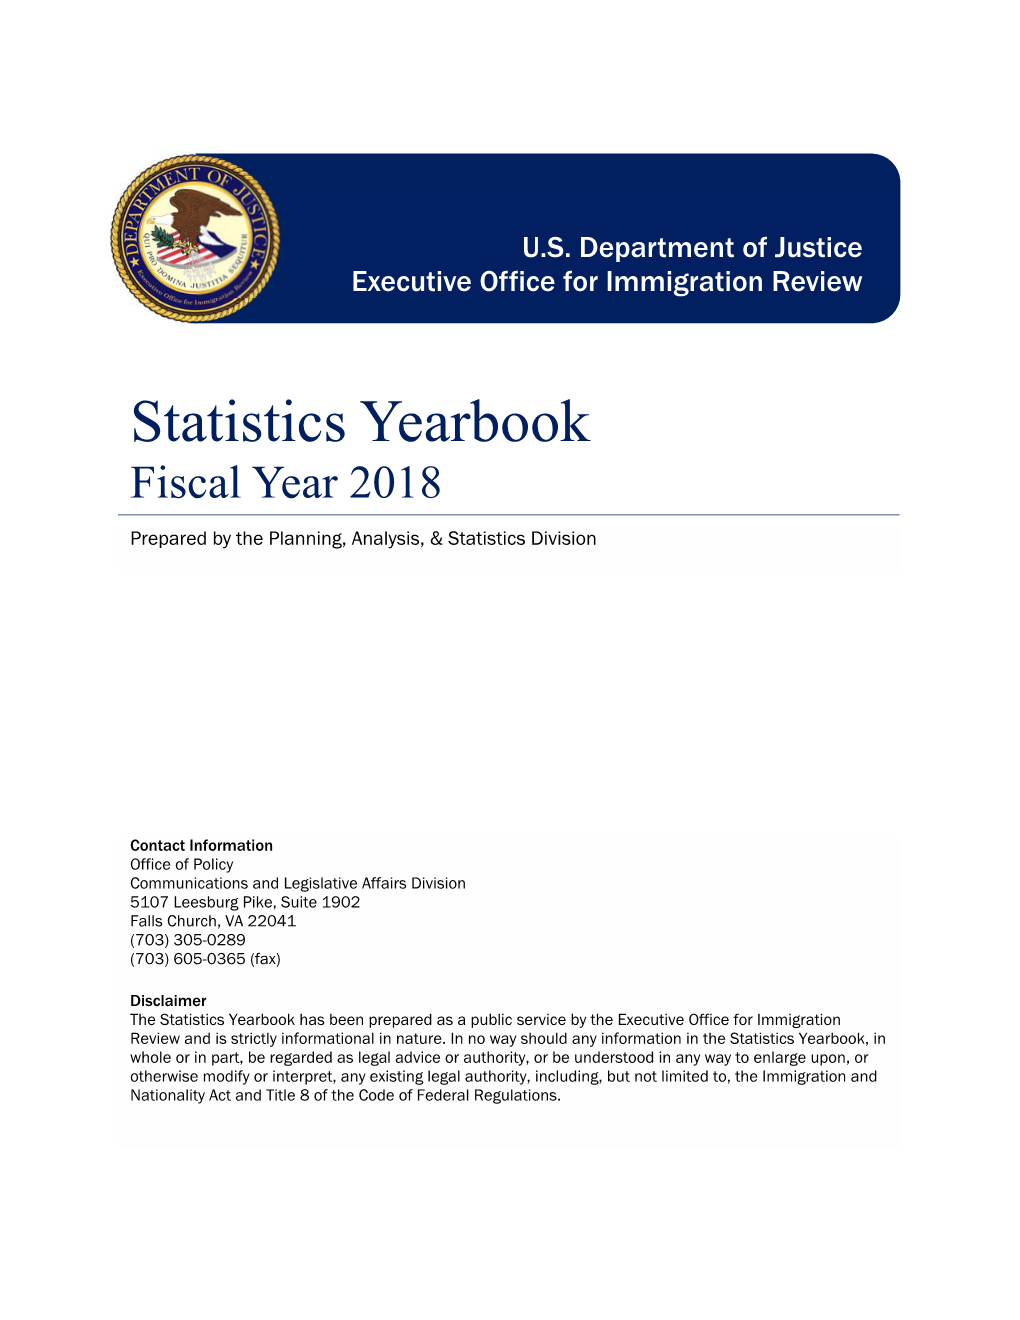 Statistical Yearbook, Fiscal Year 2018